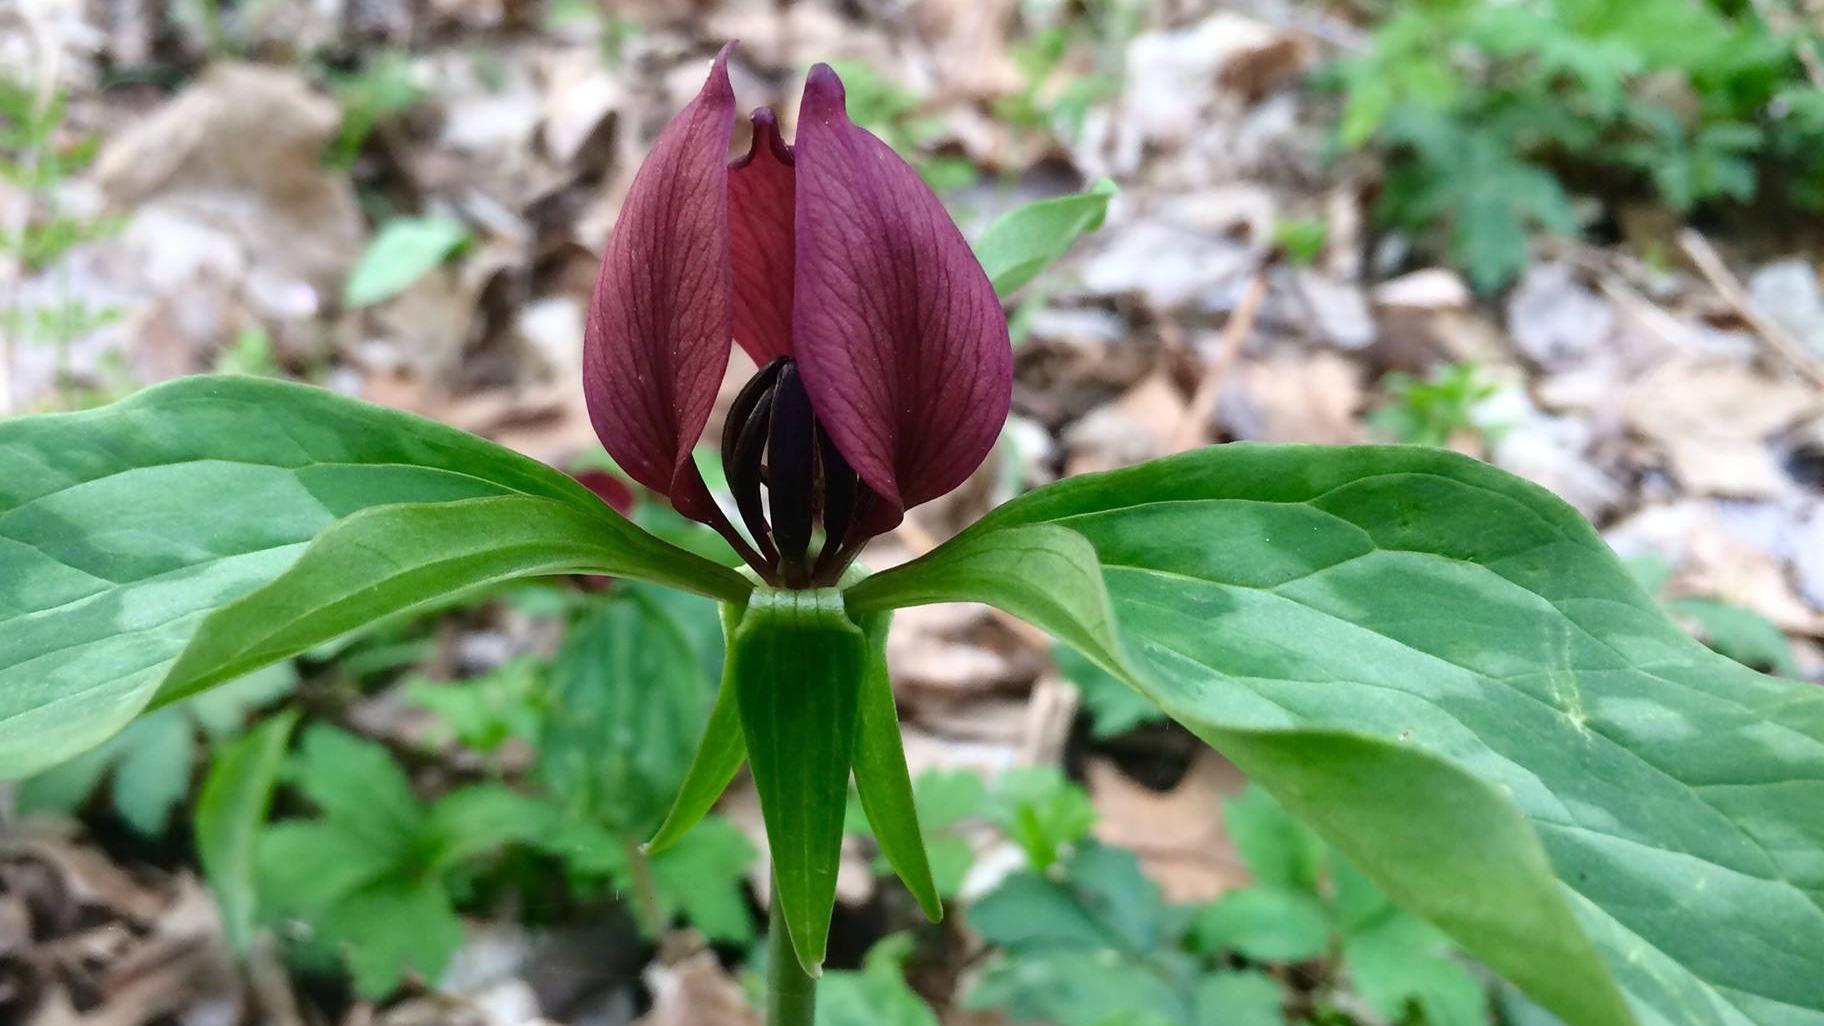 Prairie trillium was the top observation by Chicagoans in the 2021 City Nature Challenge. (Jessica Bolser / US Fish and Wildlife Service Midwest Region)